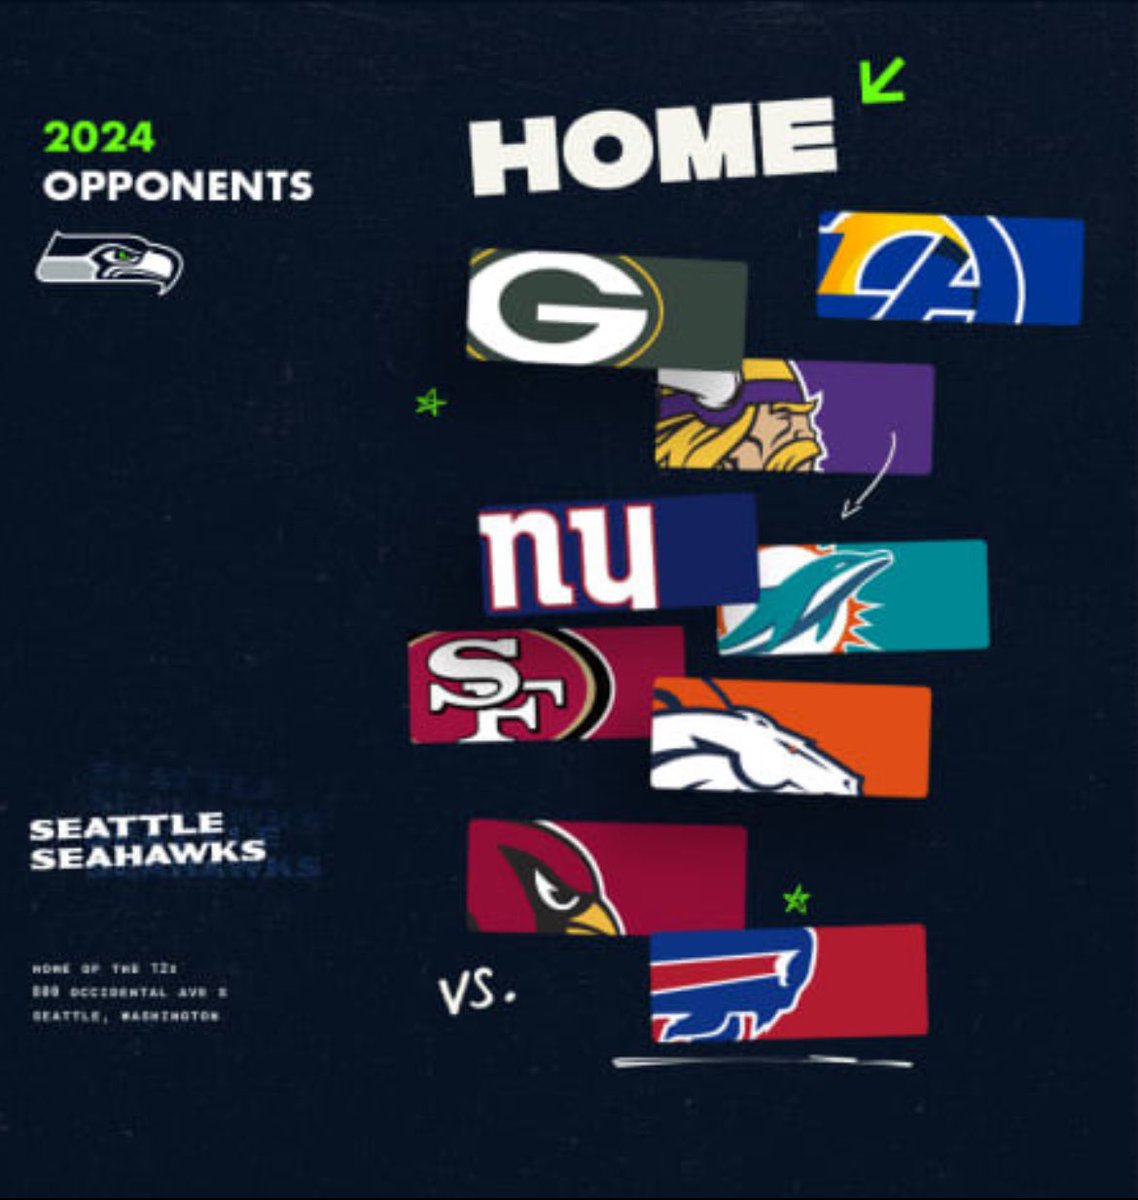 That’s an insane lineup of opponents coming to Seattle next year 

#Seahawks #12North